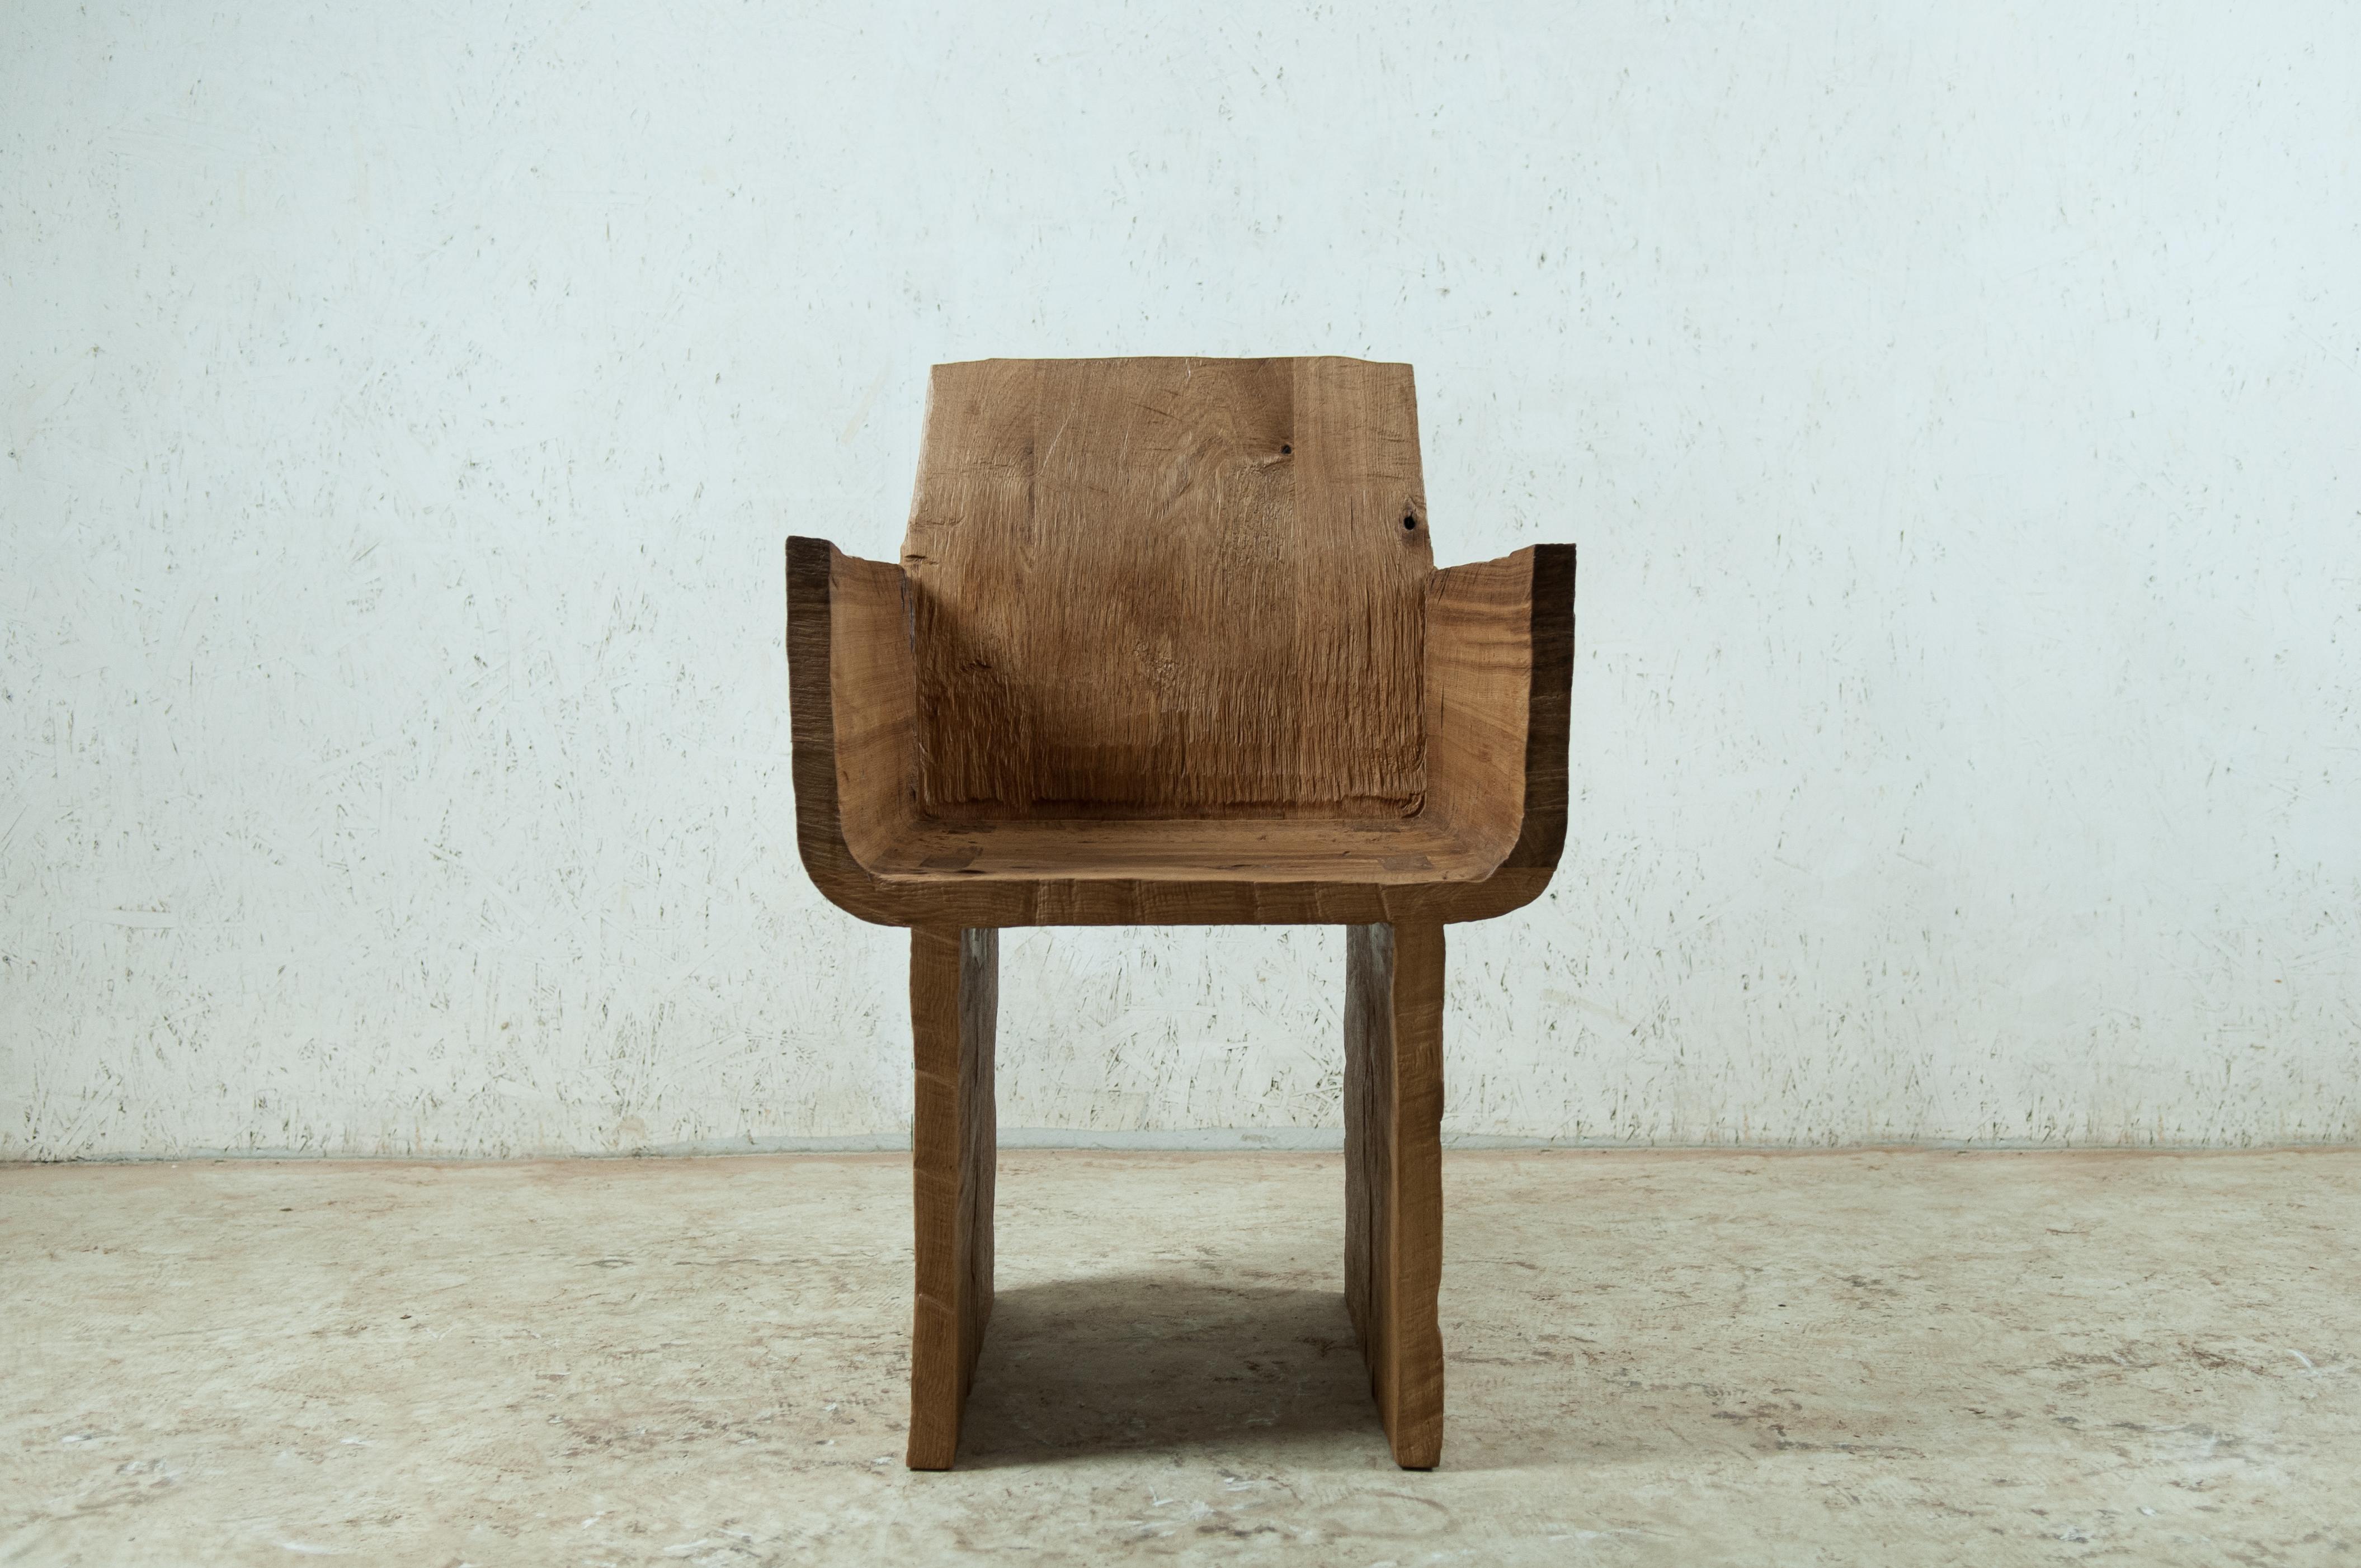 Armchair made of solid oak (+ linseed oil)
(Outdoor use OK)

Dimensions: H. 82 x 48 x 48 cm (SH 45 cm)

Founded by artist Denis Milovanov, SÓHA design studio conceives and produces furniture design and decorative objects in solid oak in an authentic